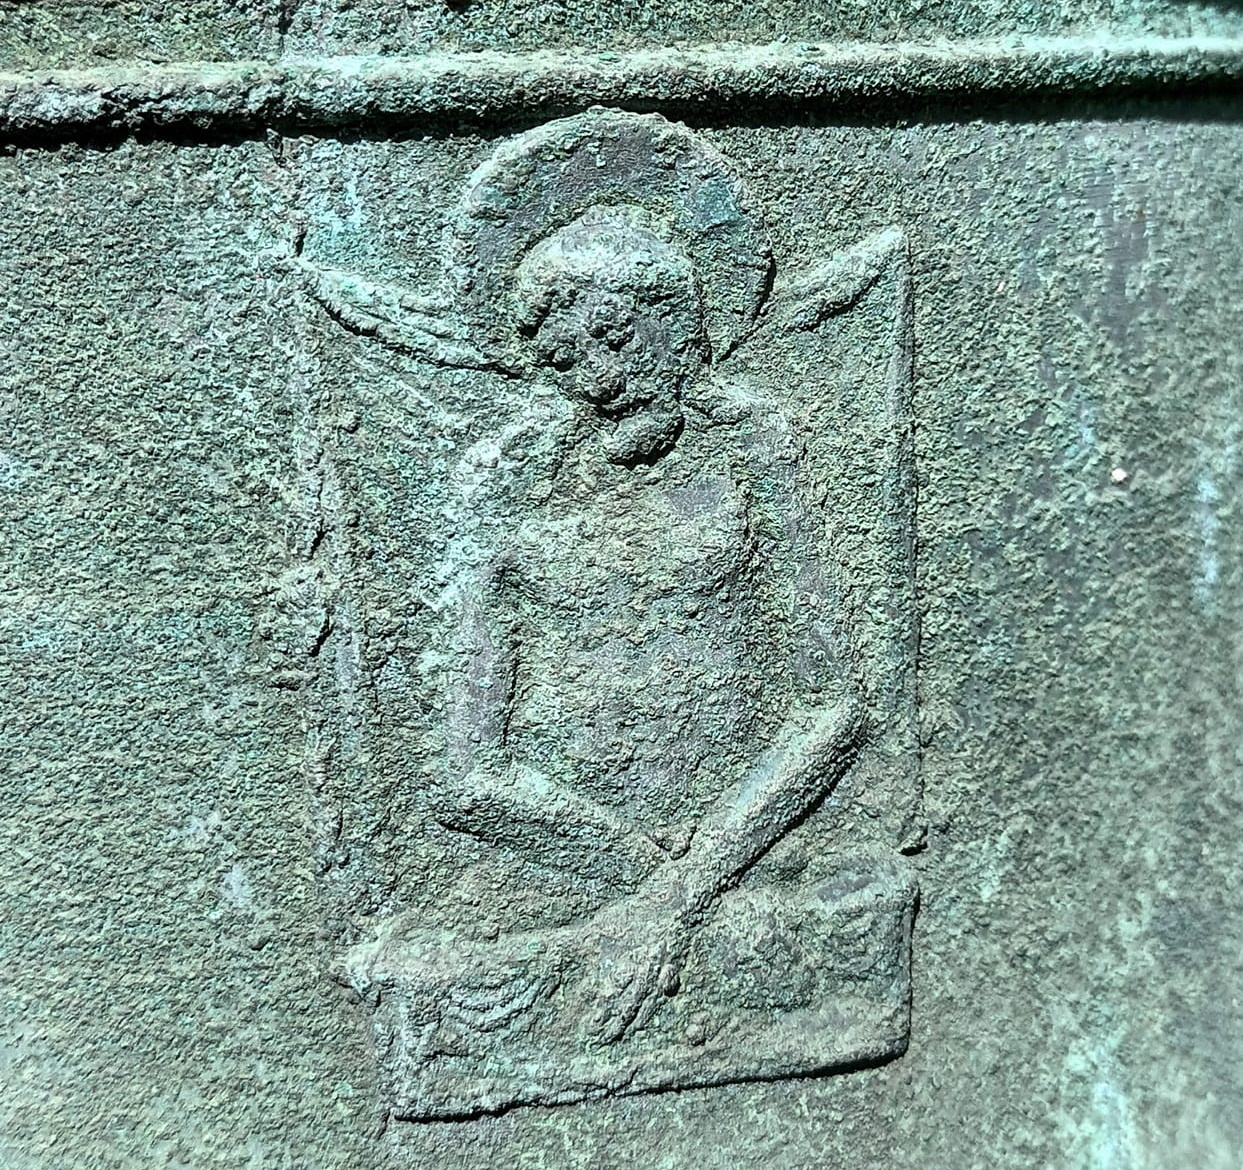 The bell features the Extreme Humility icon